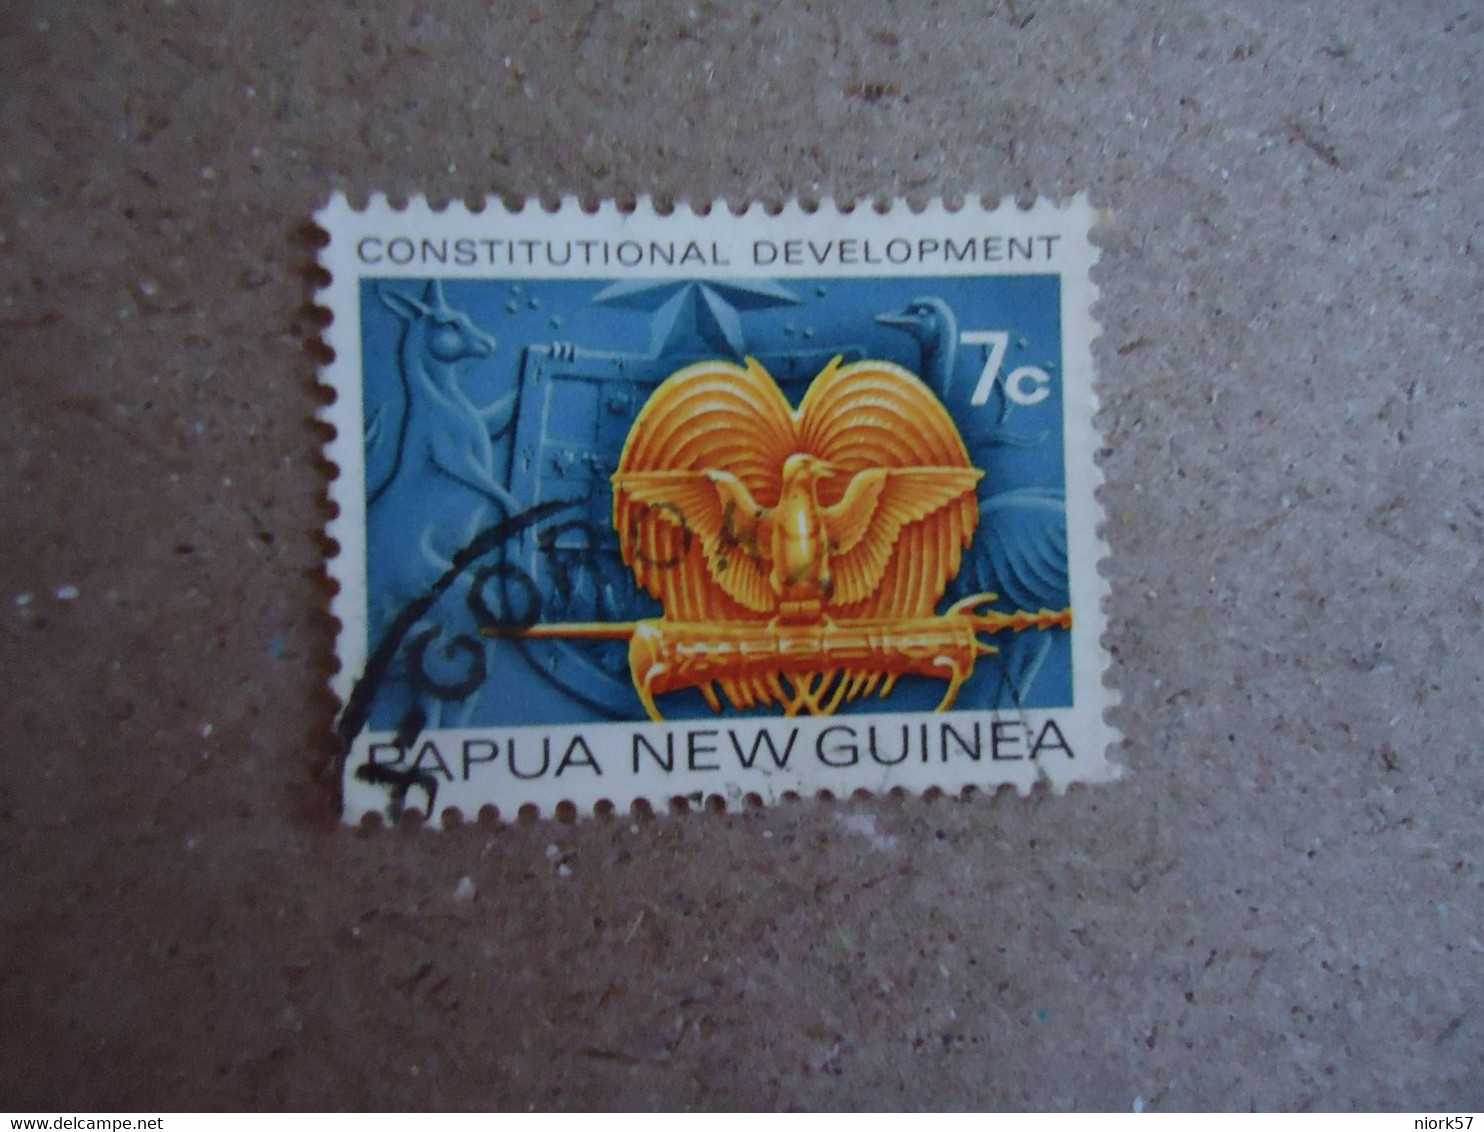 PAPUA NEW GUINEA  USED    STAMPS  SYMBOL     BIRDS - Osterinsel (Rapa Nui)